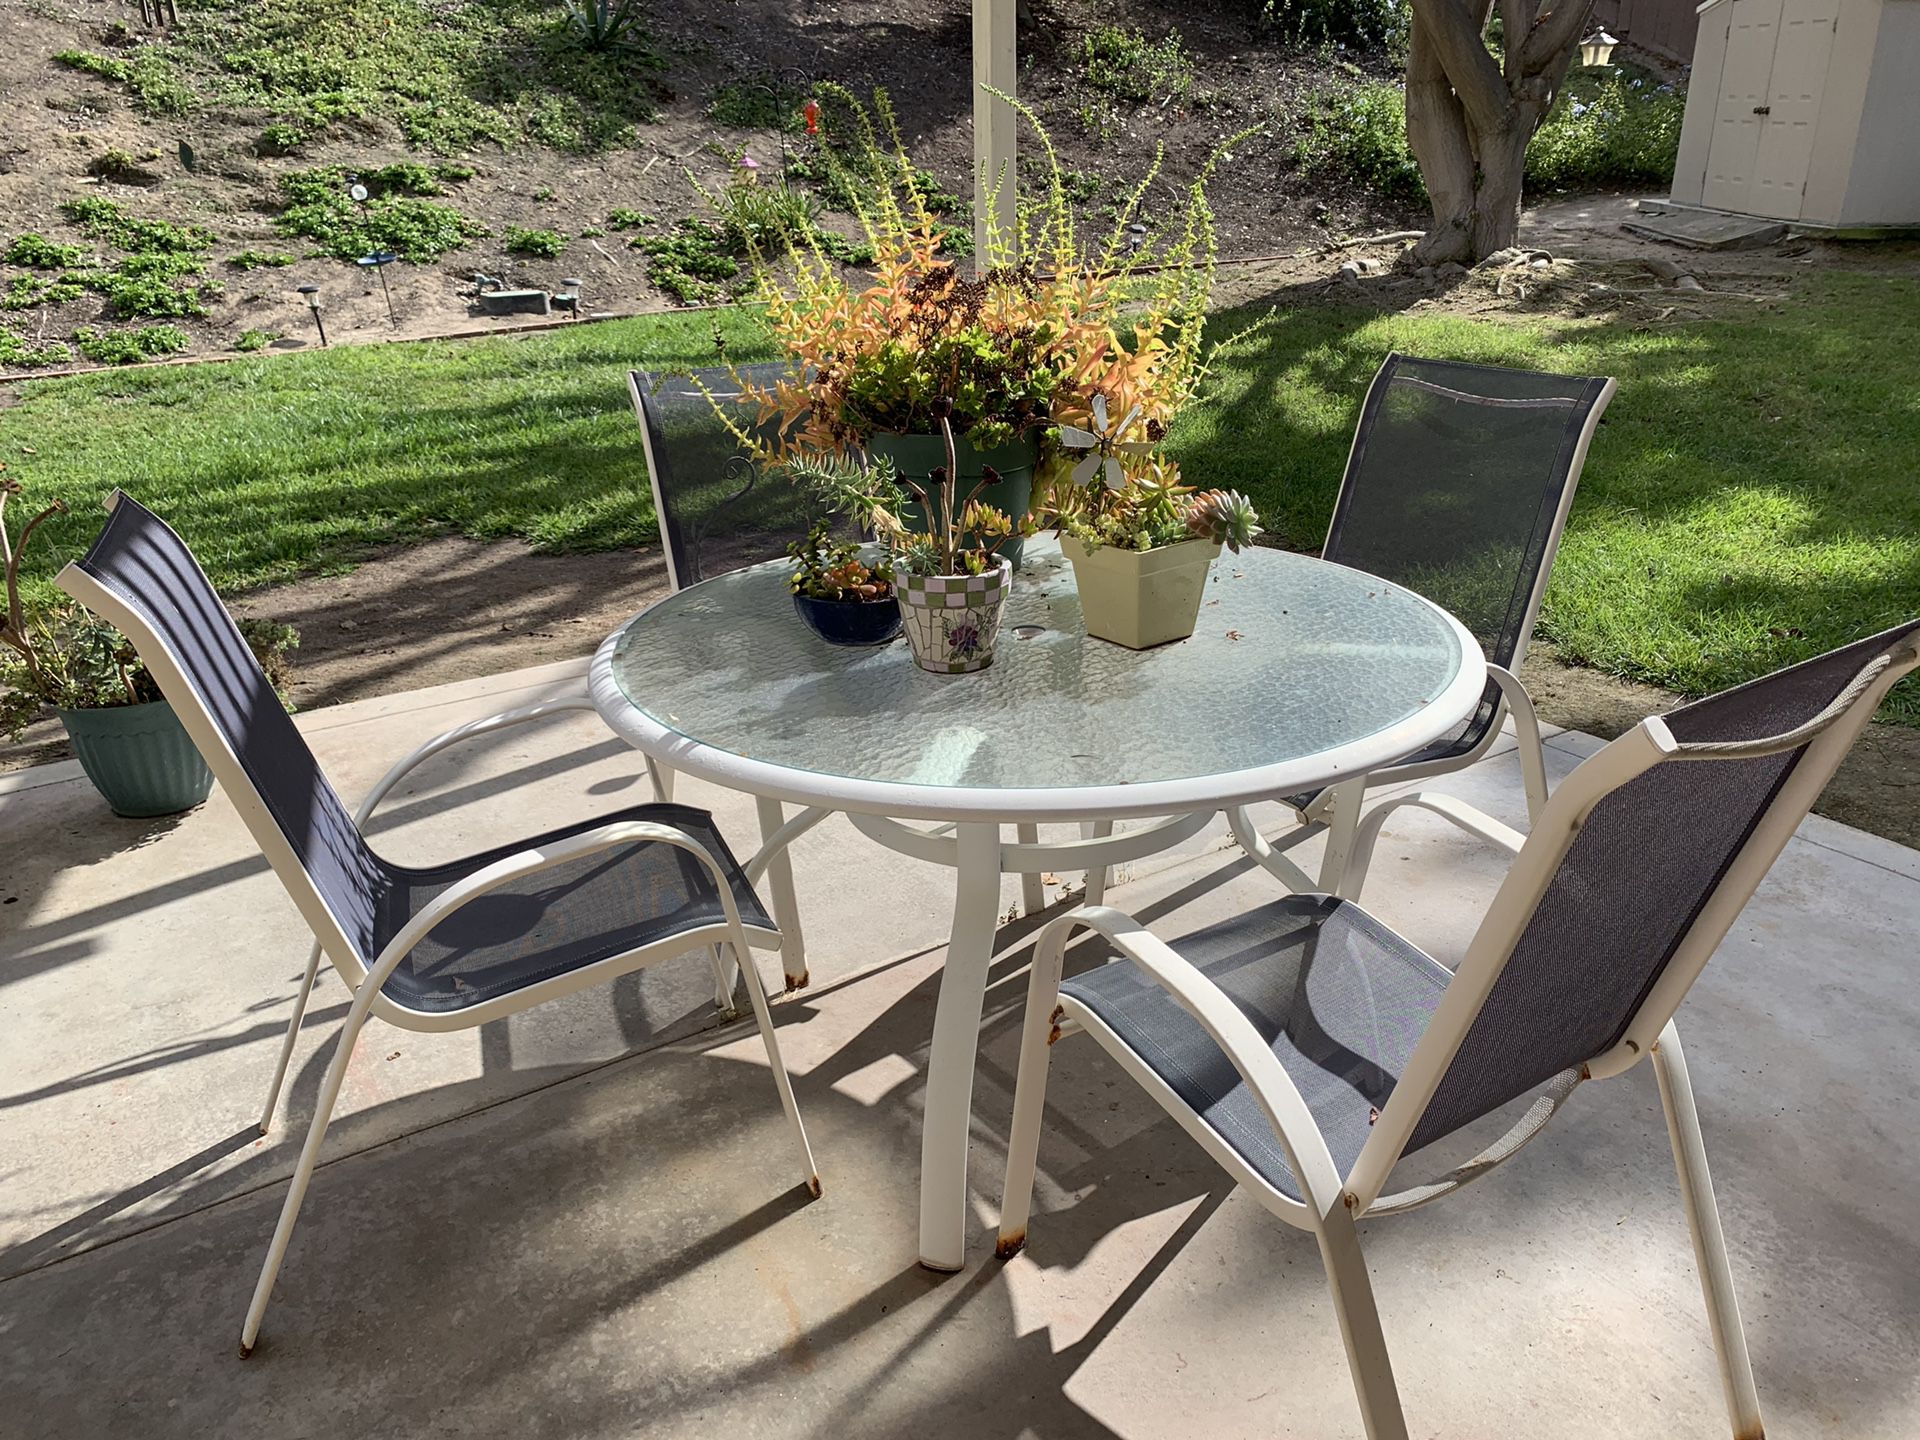 Free patio table with four chairs